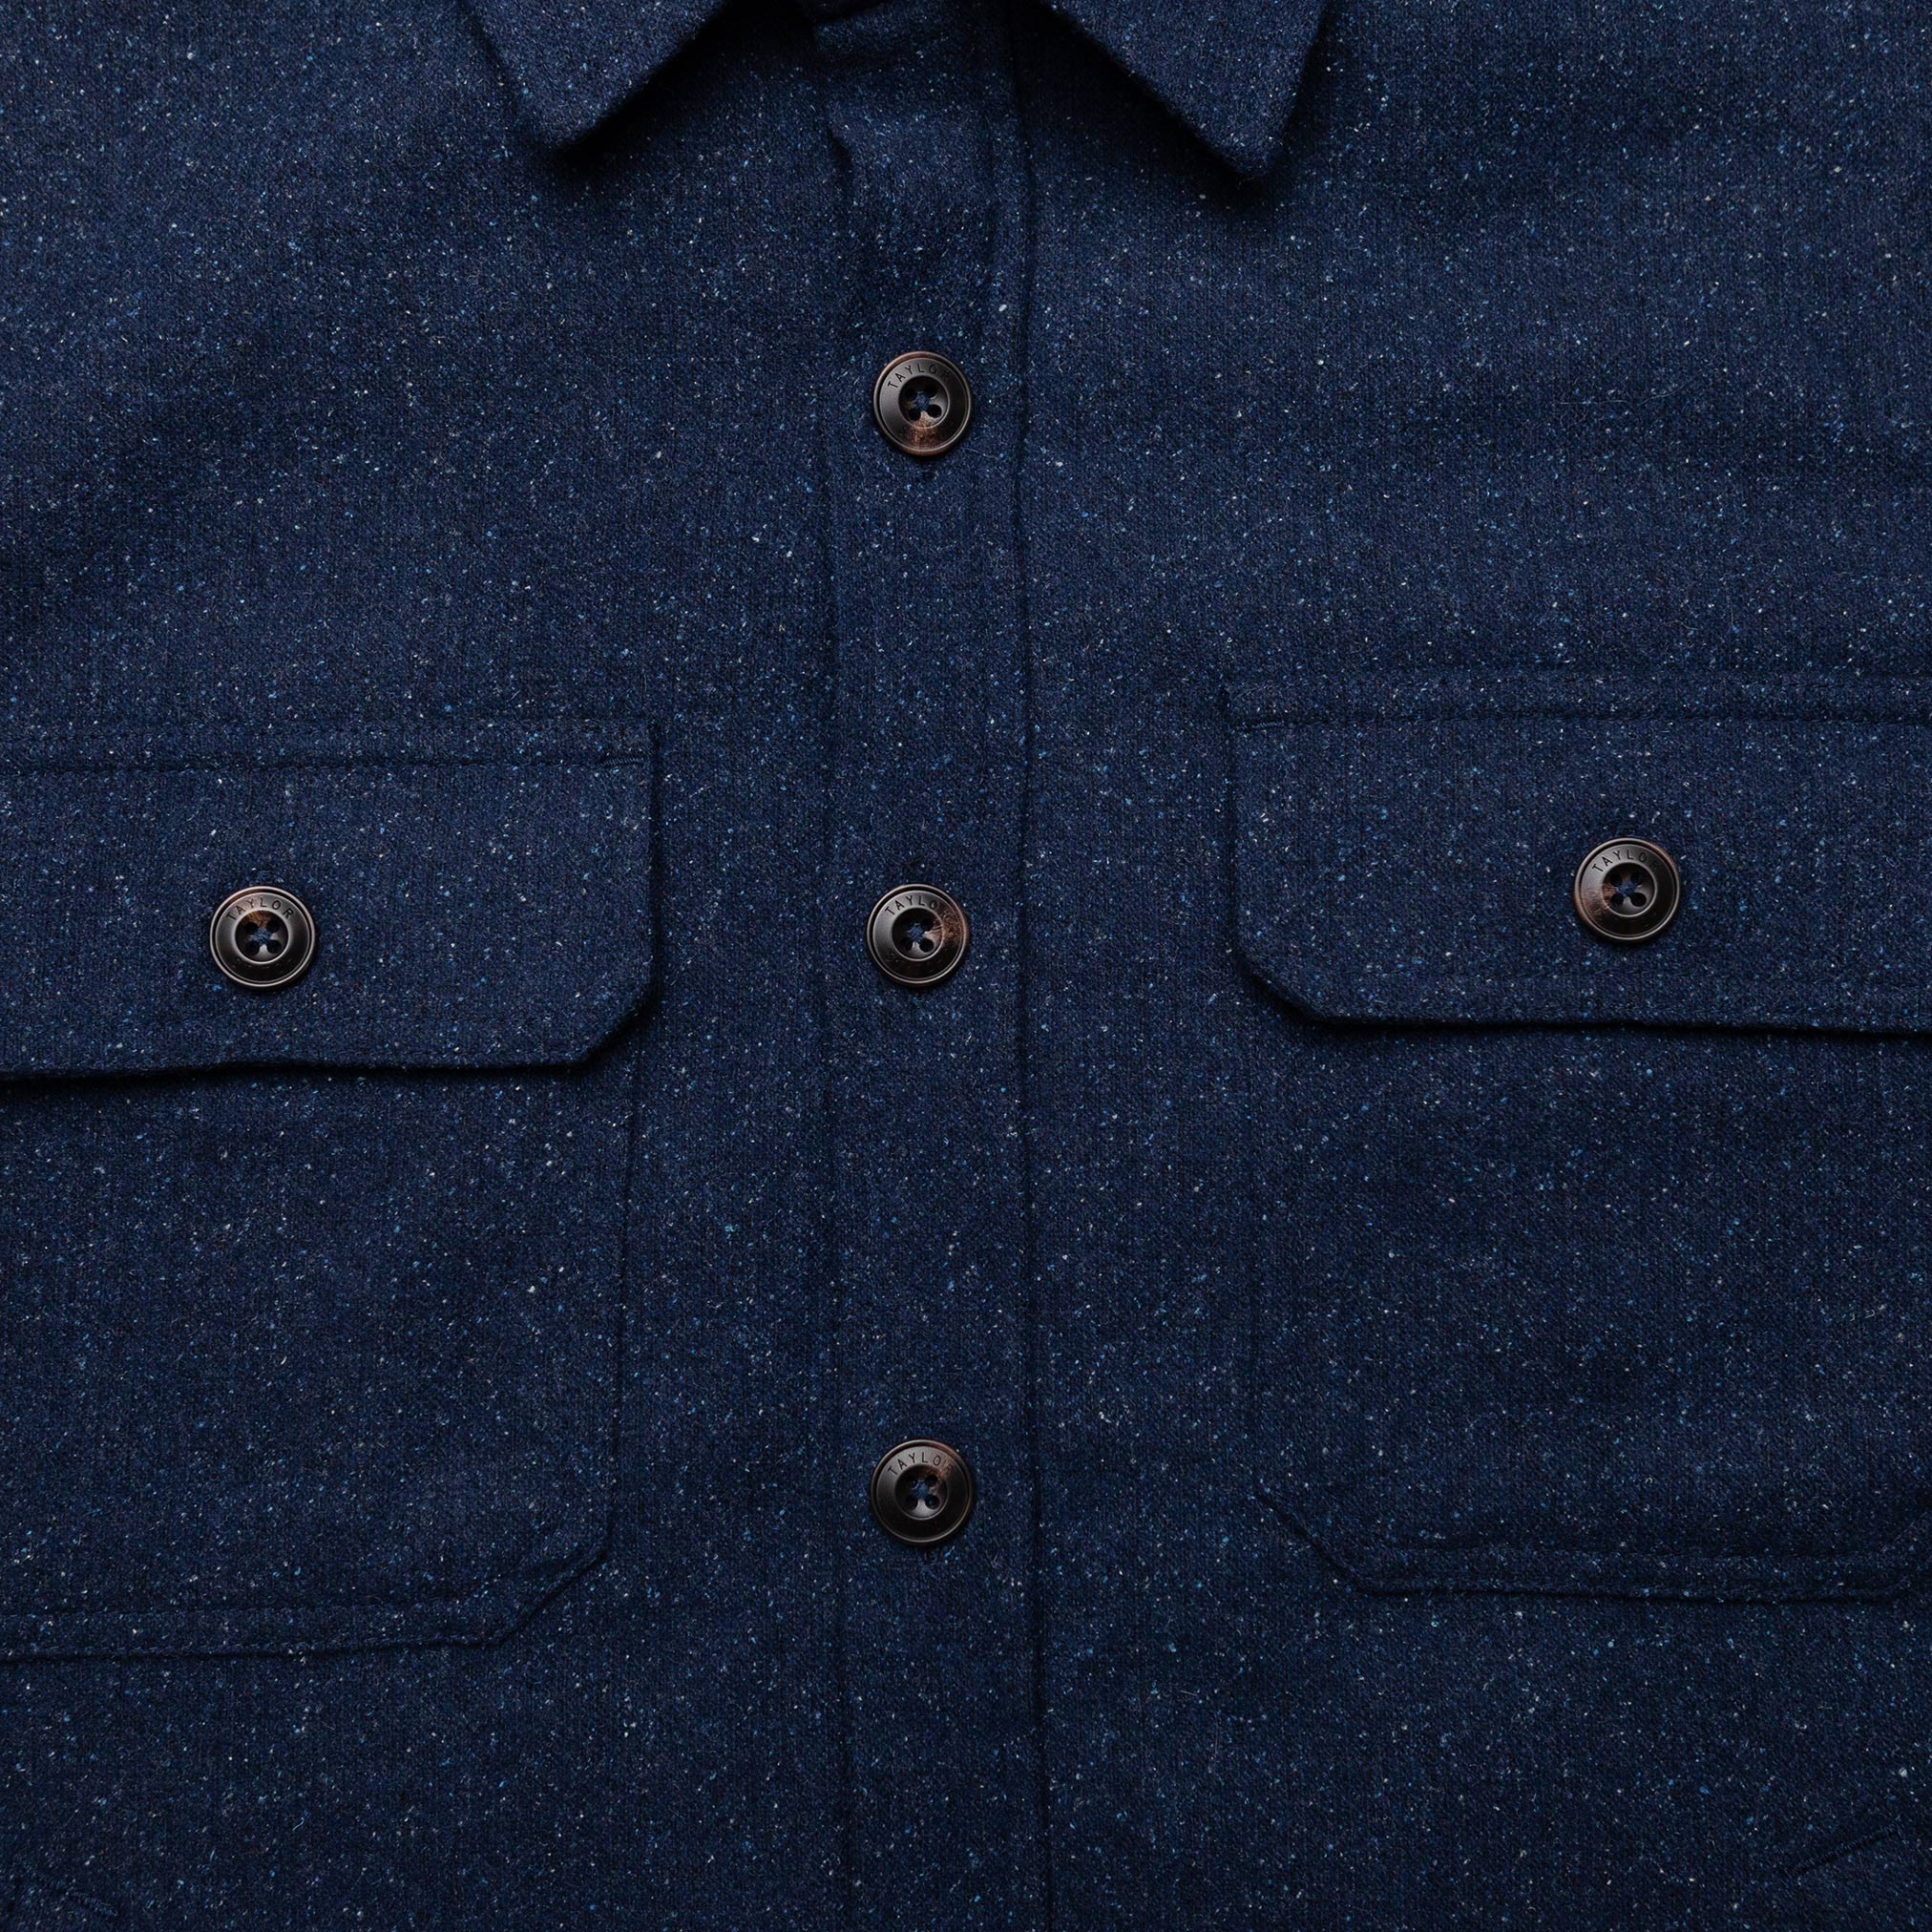 The Chandler Jacket in Navy Donegal - S/38